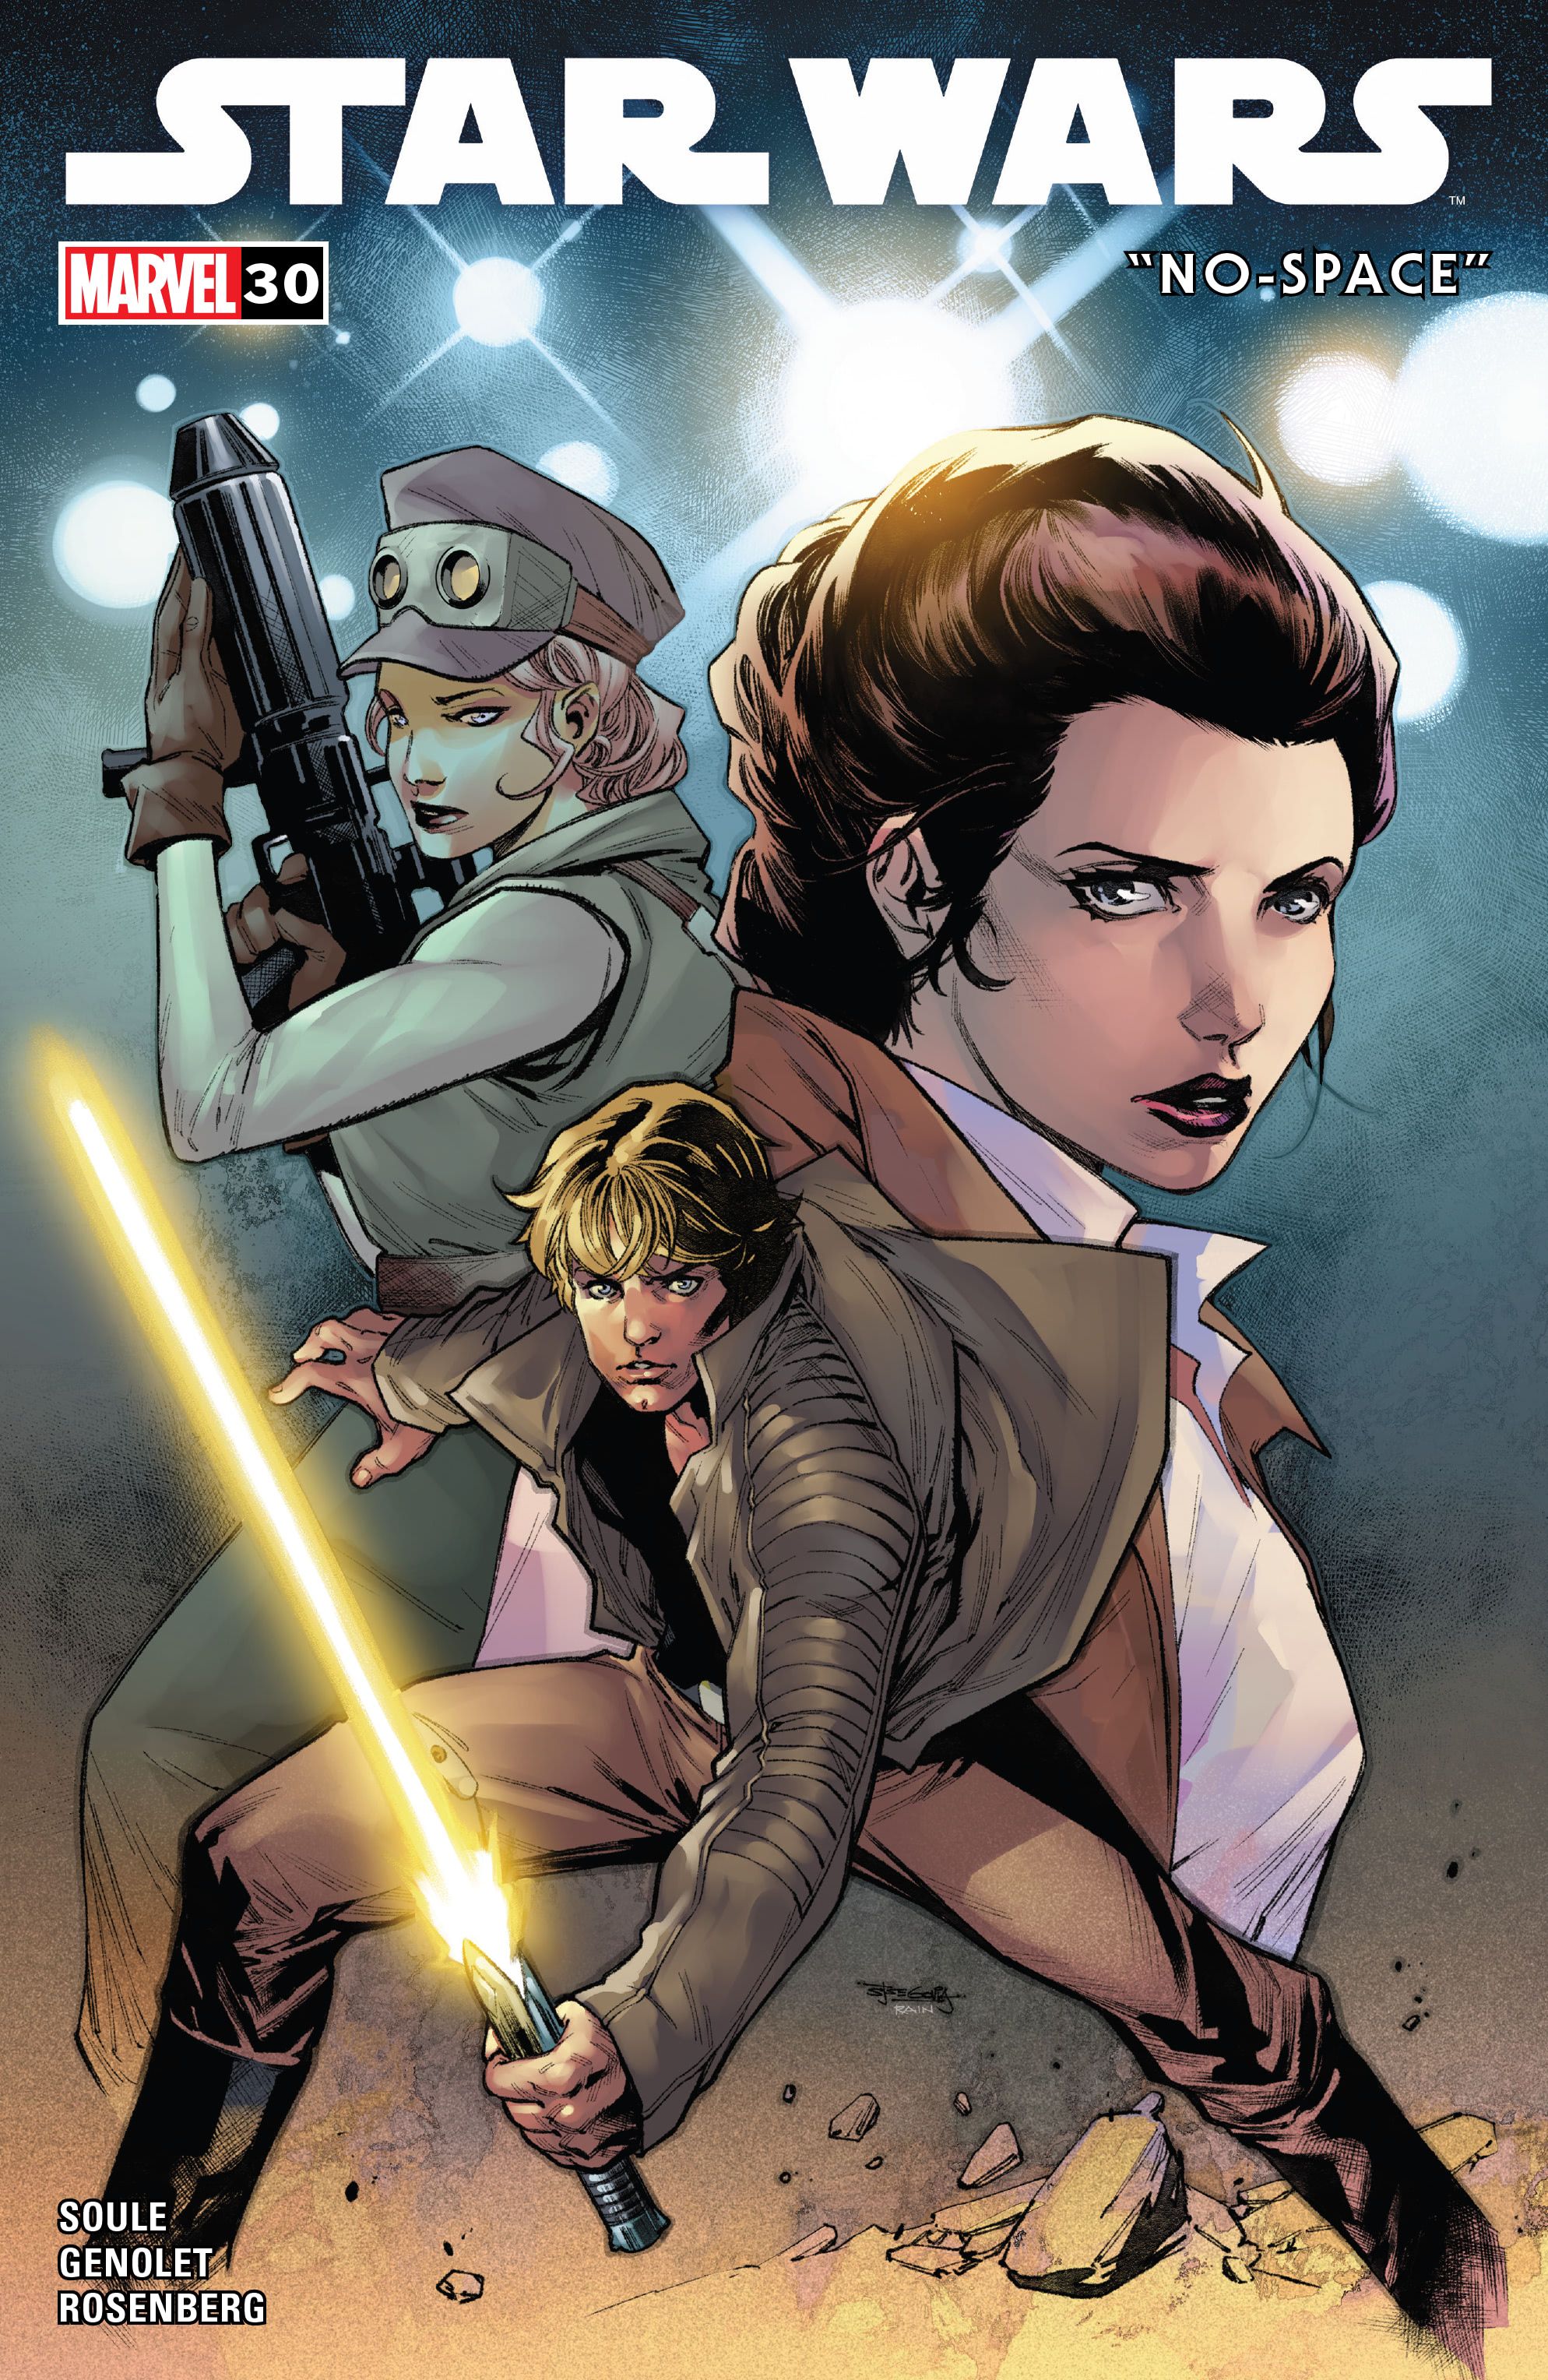 Luke Skywalker, Princess Leia, and a female soldier on the cover of Star Wars #30